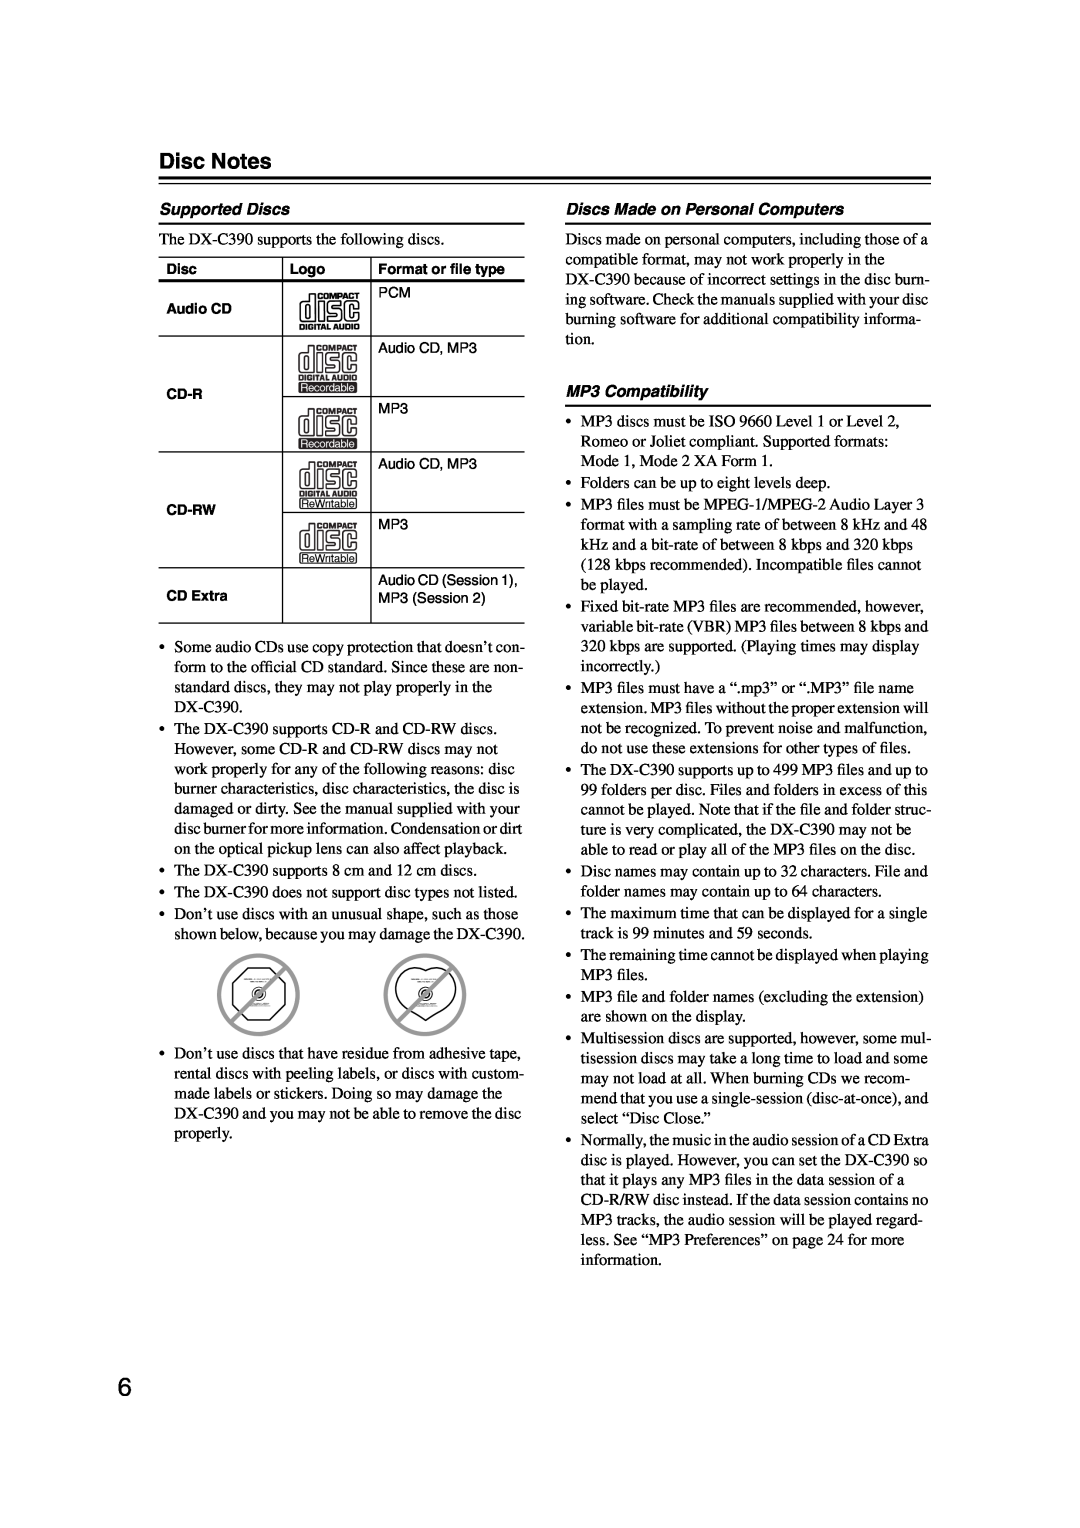 Onkyo DX-C390 instruction manual Disc Notes, Supported Discs, Discs Made on Personal Computers, MP3 Compatibility 